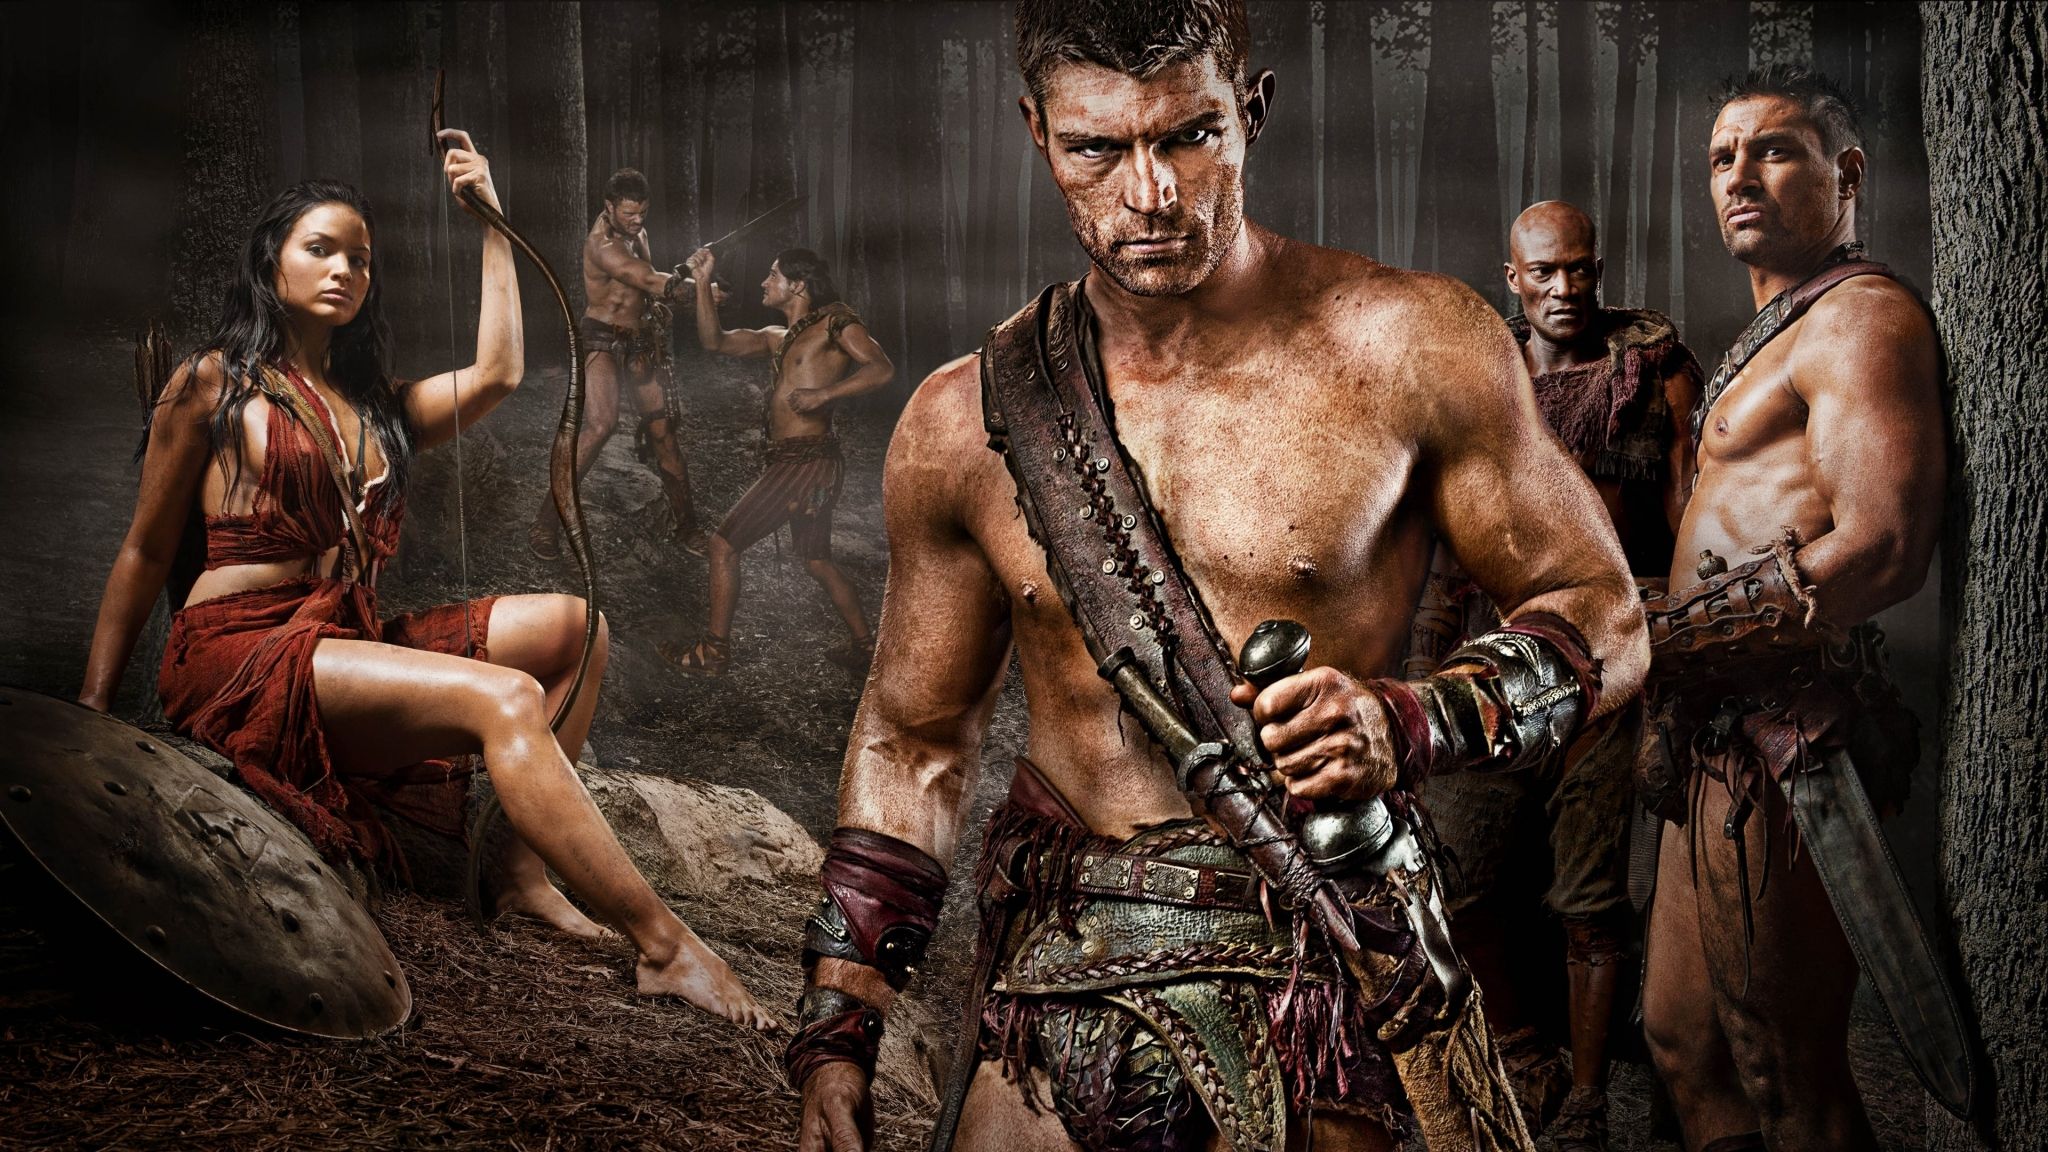 spartacus all season download 480p hindi dubbed